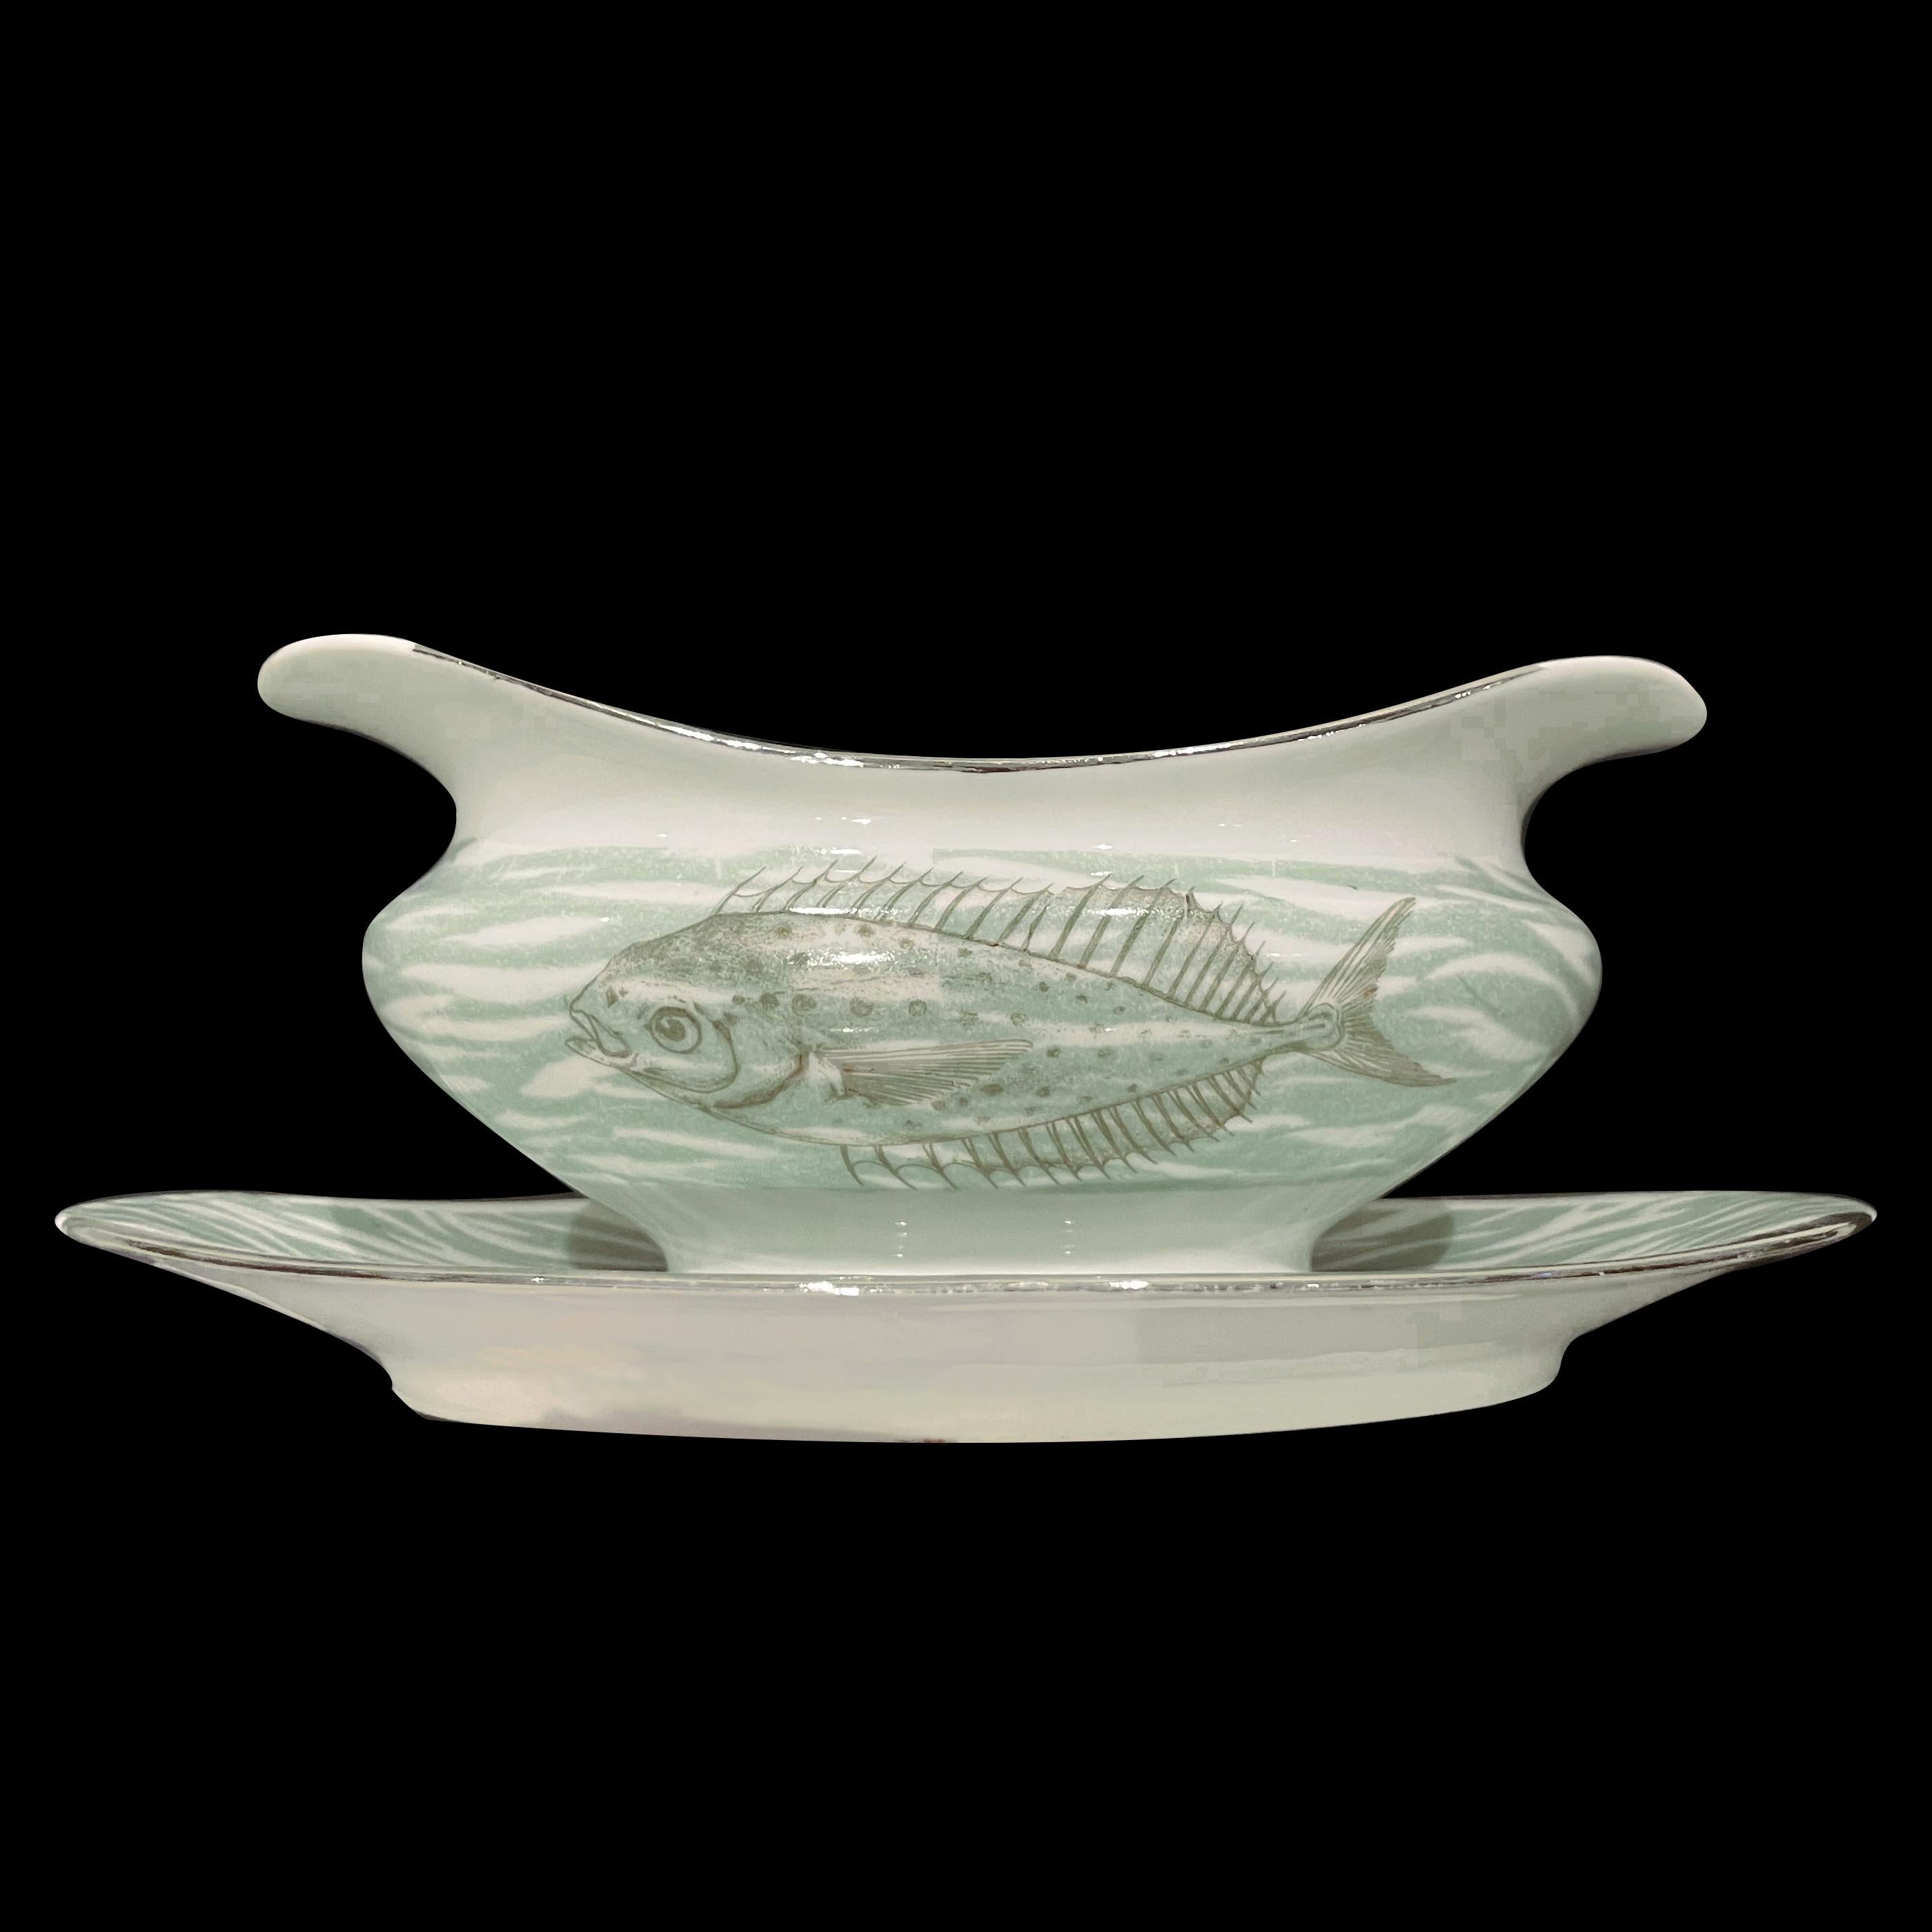 Art Deco style Fish Service for 12 People by Bernardaud Limoges  c. 1970 For Sale 4